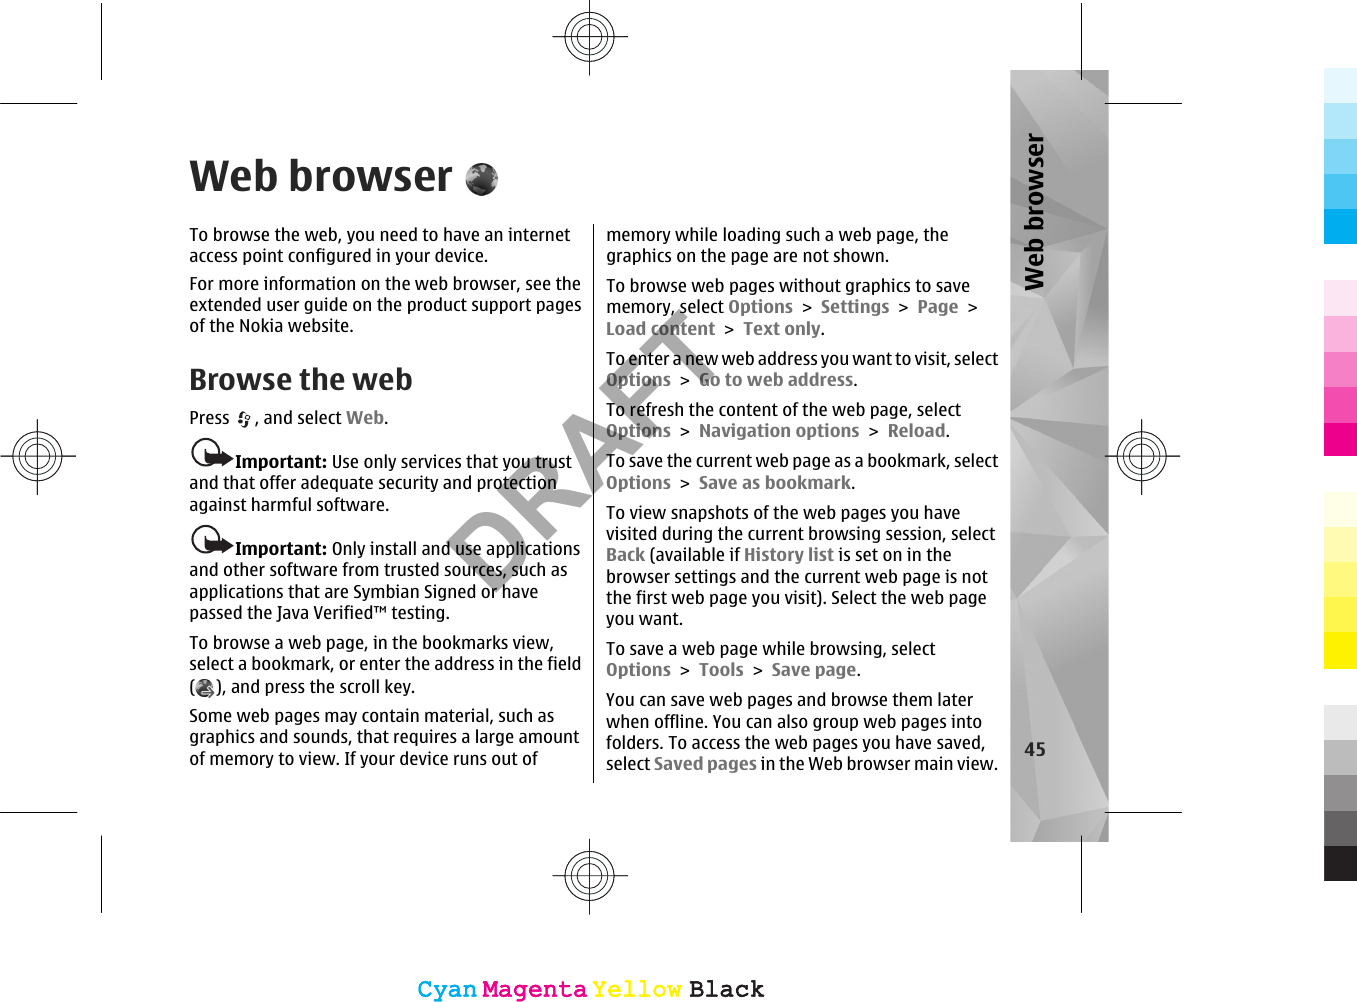 Web browserTo browse the web, you need to have an internetaccess point configured in your device.For more information on the web browser, see theextended user guide on the product support pagesof the Nokia website.Browse the webPress  , and select Web.Important: Use only services that you trustand that offer adequate security and protectionagainst harmful software.Important: Only install and use applicationsand other software from trusted sources, such asapplications that are Symbian Signed or havepassed the Java Verified™ testing.To browse a web page, in the bookmarks view,select a bookmark, or enter the address in the field(), and press the scroll key.Some web pages may contain material, such asgraphics and sounds, that requires a large amountof memory to view. If your device runs out ofmemory while loading such a web page, thegraphics on the page are not shown.To browse web pages without graphics to savememory, select Options &gt; Settings &gt; Page &gt;Load content &gt; Text only.To enter a new web address you want to visit, selectOptions &gt; Go to web address.To refresh the content of the web page, selectOptions &gt; Navigation options &gt; Reload.To save the current web page as a bookmark, selectOptions &gt; Save as bookmark.To view snapshots of the web pages you havevisited during the current browsing session, selectBack (available if History list is set on in thebrowser settings and the current web page is notthe first web page you visit). Select the web pageyou want.To save a web page while browsing, selectOptions &gt; Tools &gt; Save page.You can save web pages and browse them laterwhen offline. You can also group web pages intofolders. To access the web pages you have saved,select Saved pages in the Web browser main view. 45Web browserCyanCyanMagentaMagentaYellowYellowBlackBlackCyanCyanMagentaMagentaYellowYellowBlackBlackDRAFT